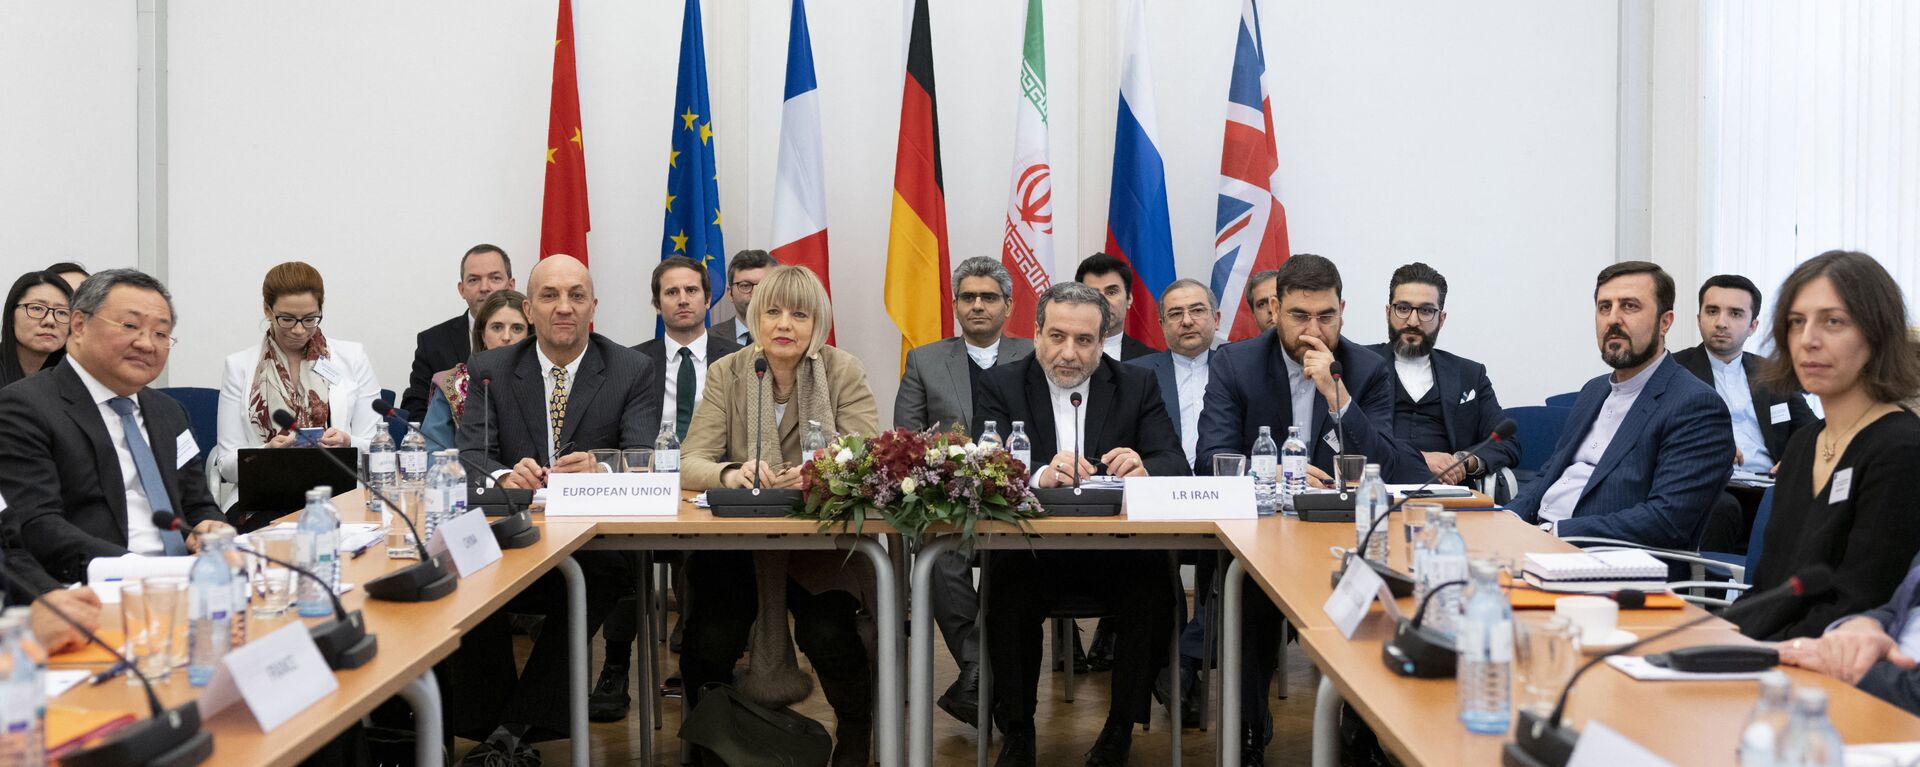 Iranian political deputy at the Ministry of Foreign Affairs of Iran Abbas Araghchi (C-R), and German Secretary General of the European External Action Service (EEAS) Helga Maria Schmid (C-L) attend a meeting of the Joint Commission on Iran's nuclear program (JCPOA) at EU Delegation to the International Organizations office in Vienna, Austria, on December 6, 2019. (Photo by JOE KLAMAR / AFP) - Sputnik International, 1920, 02.04.2021